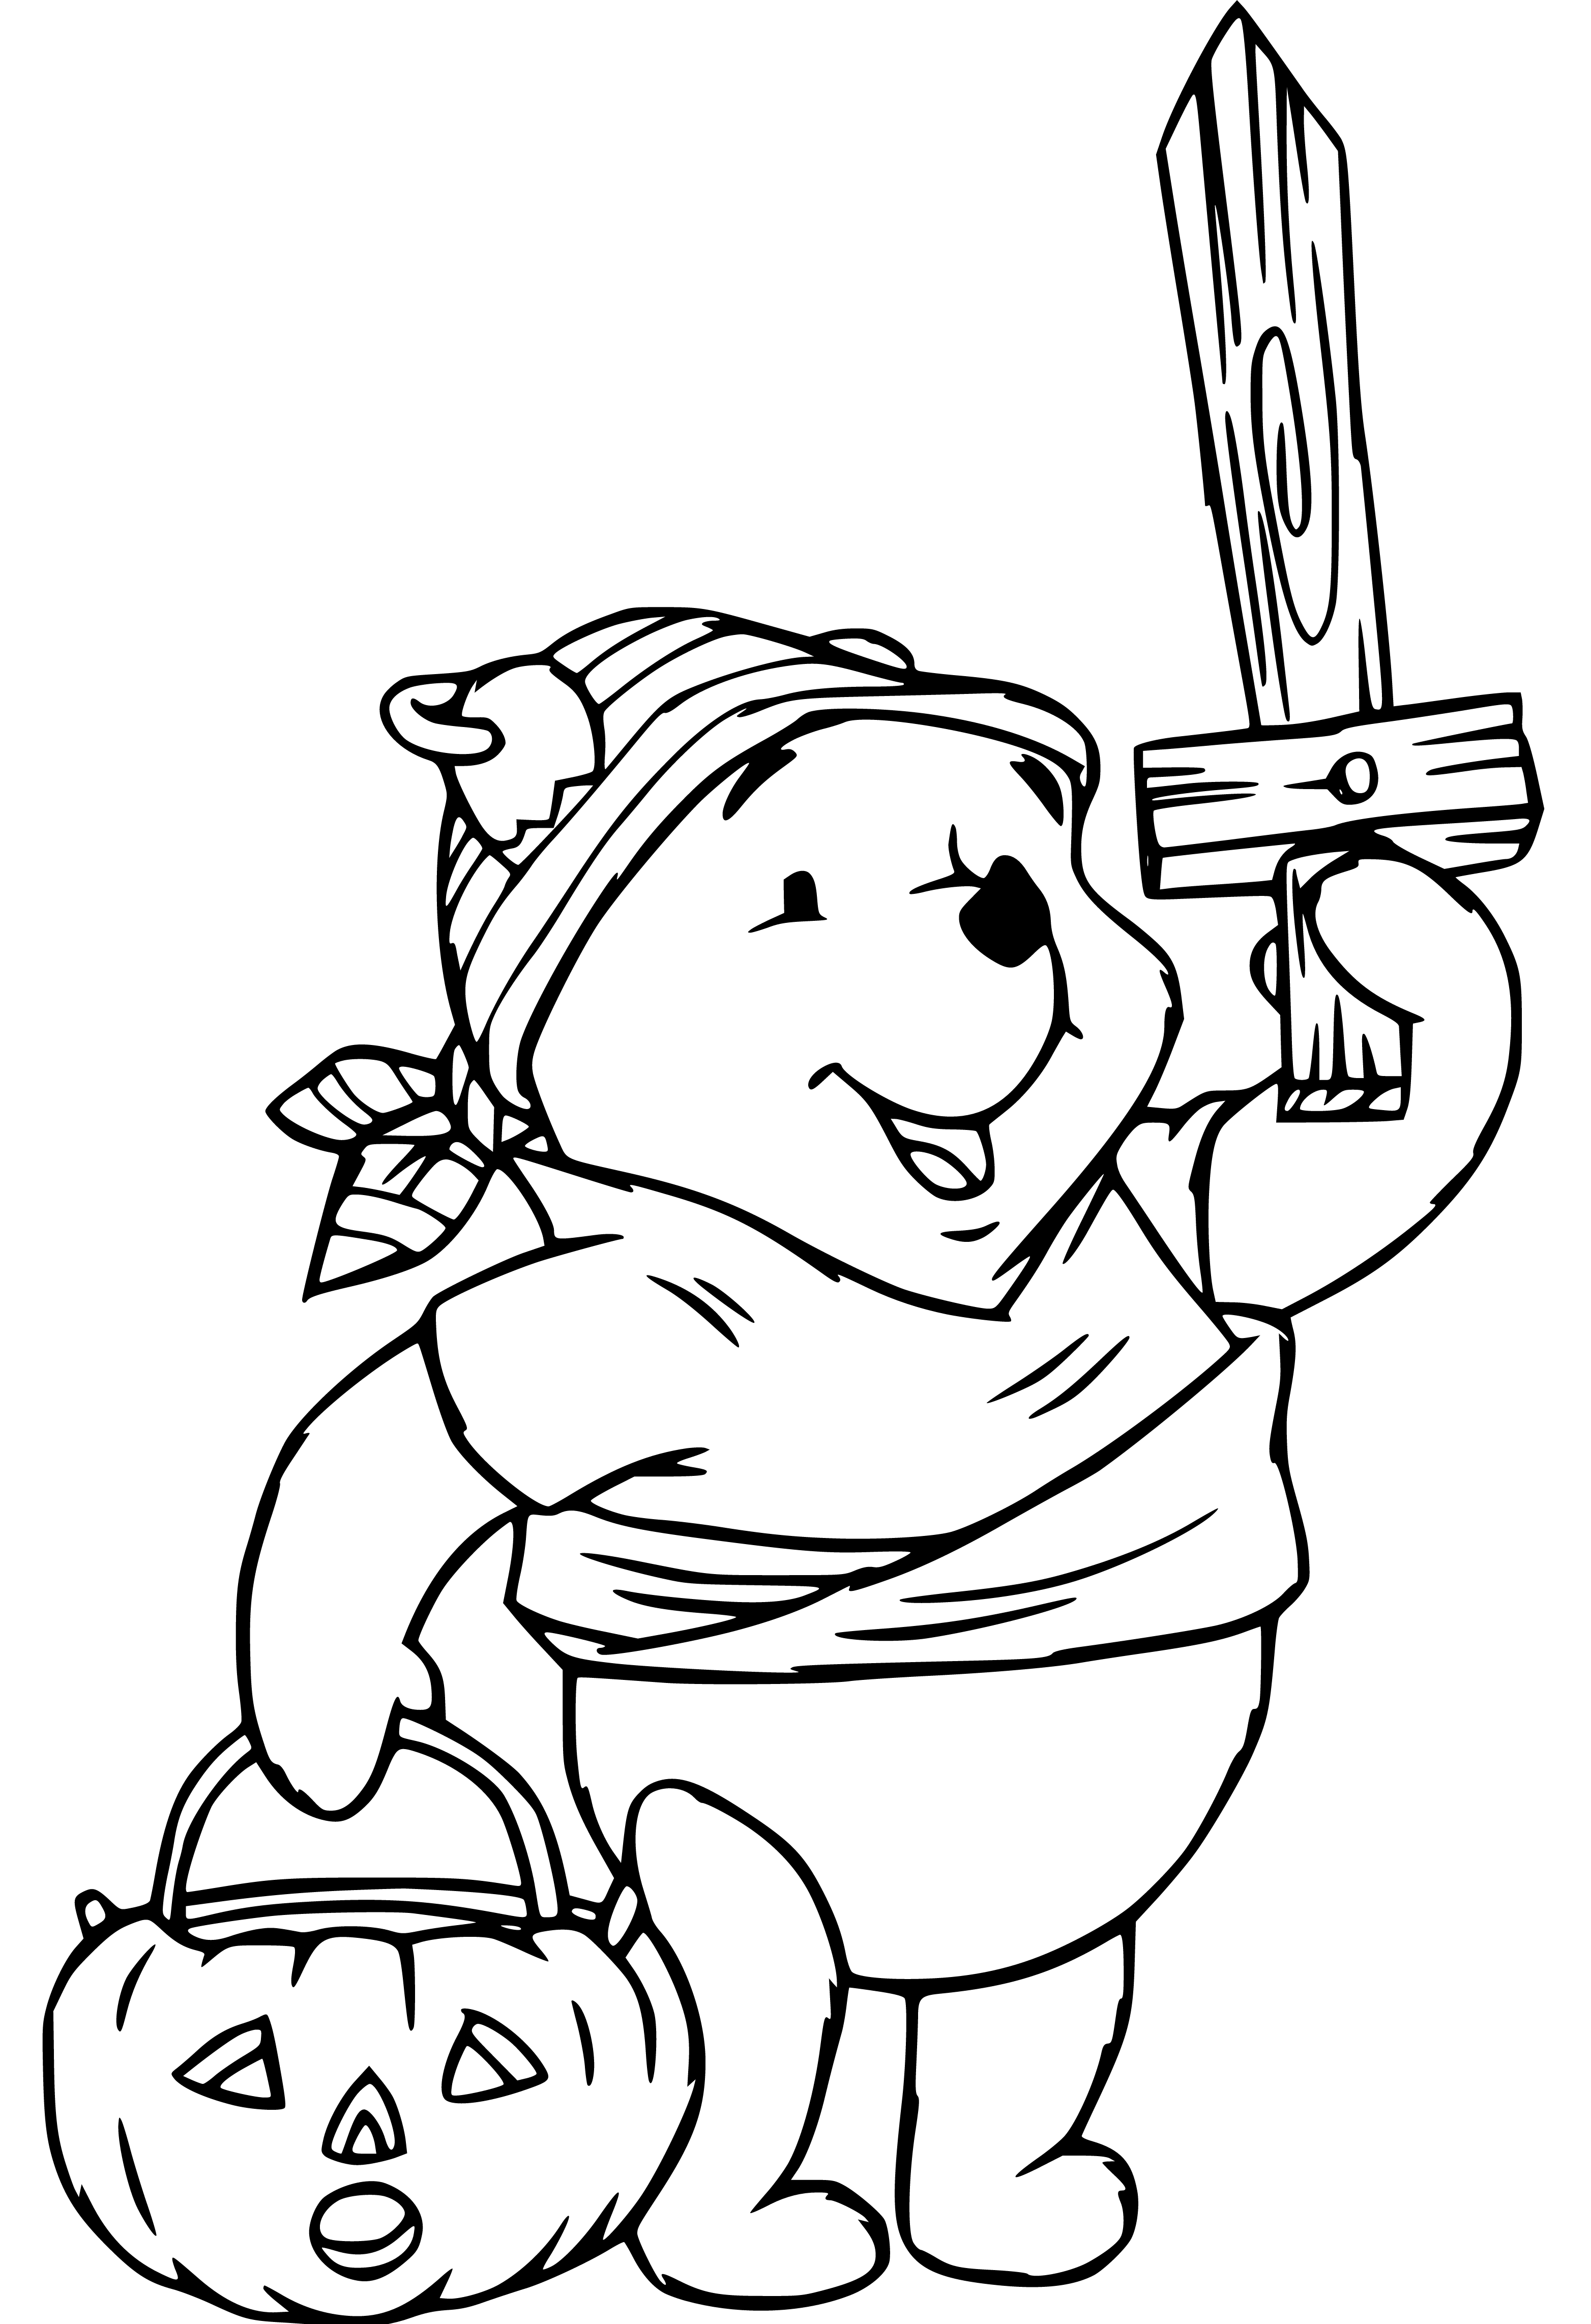 Printable Pooh Bear Halloween Coloring Page for kids.